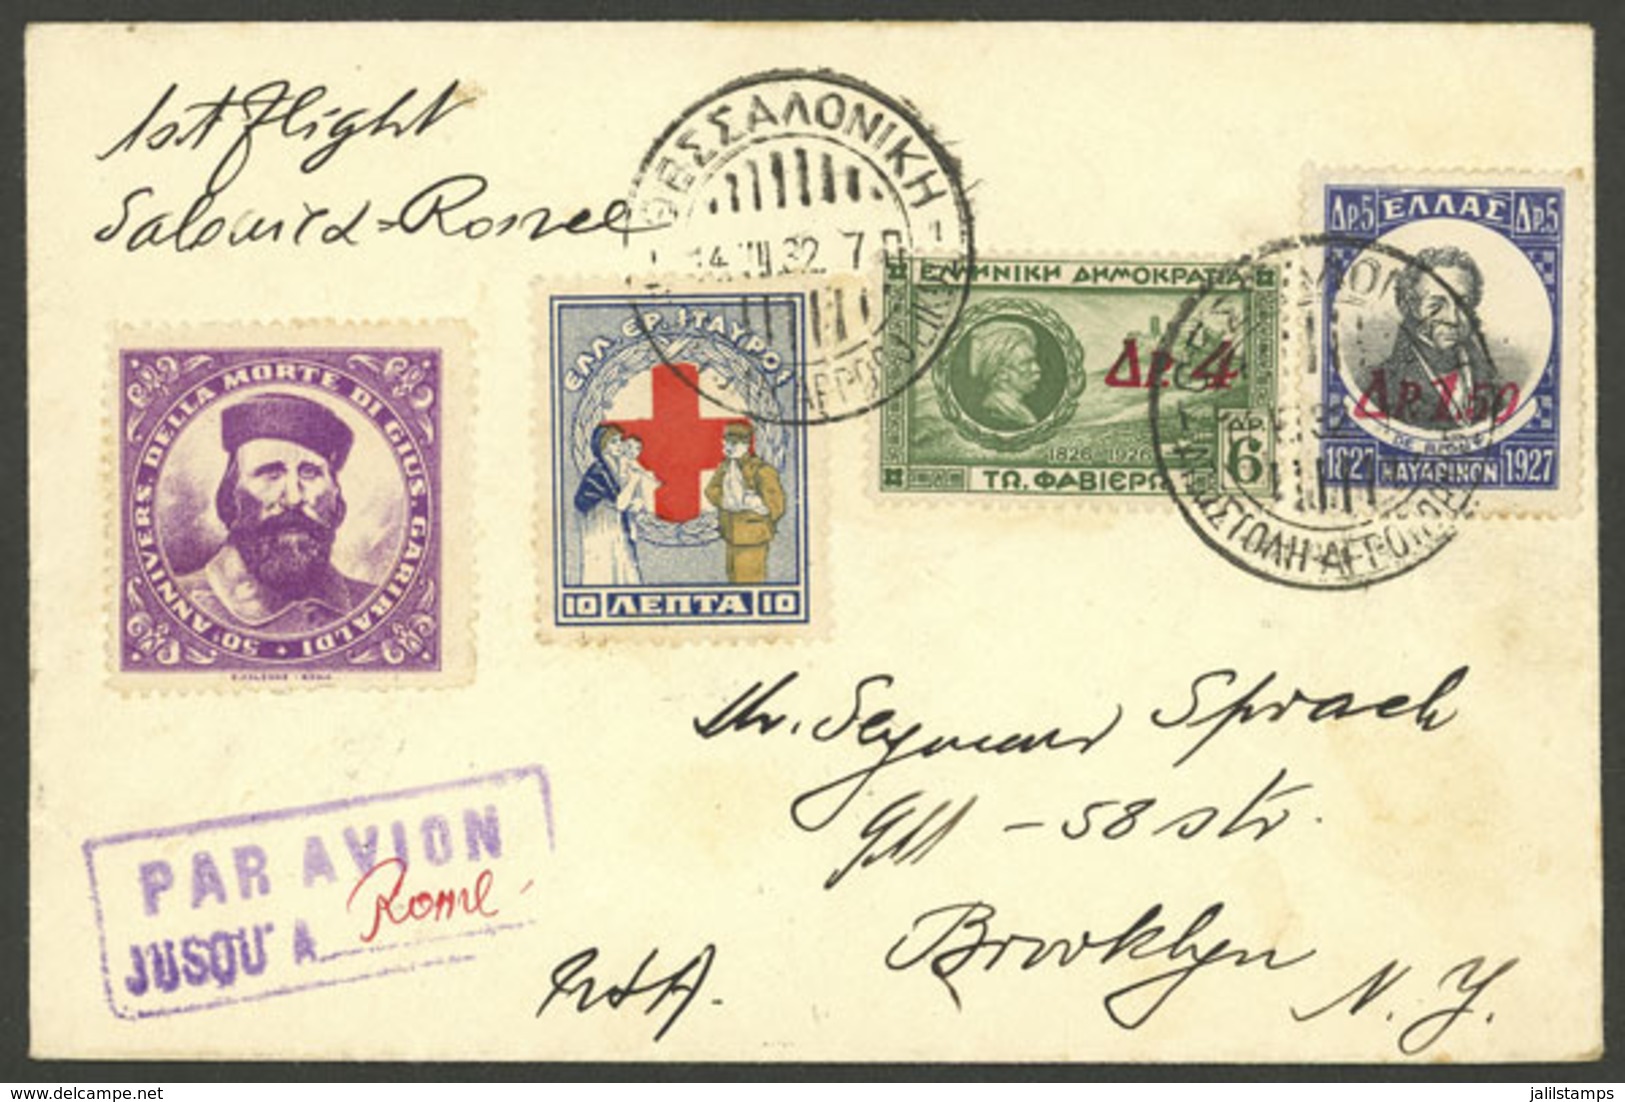 GREECE: 14/JUL/1932 First Flight Salonica - Roma By S.A.M., Cover Of Fine Quality, Scarce, Only 42 Letters Were Carried  - Covers & Documents